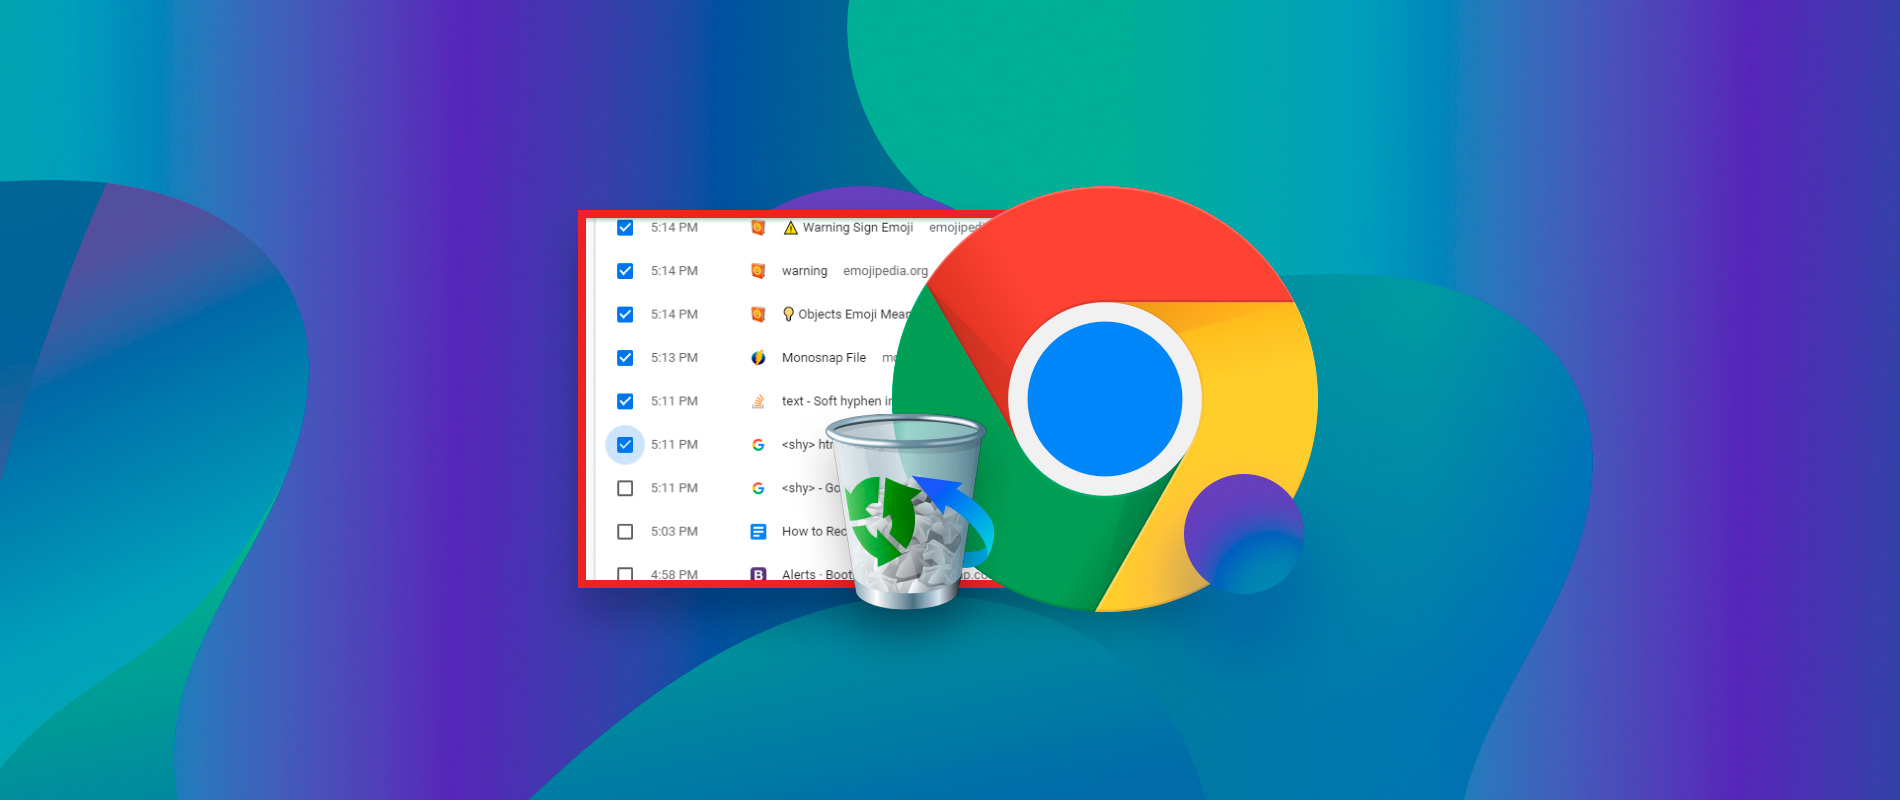 google chrome browser download history